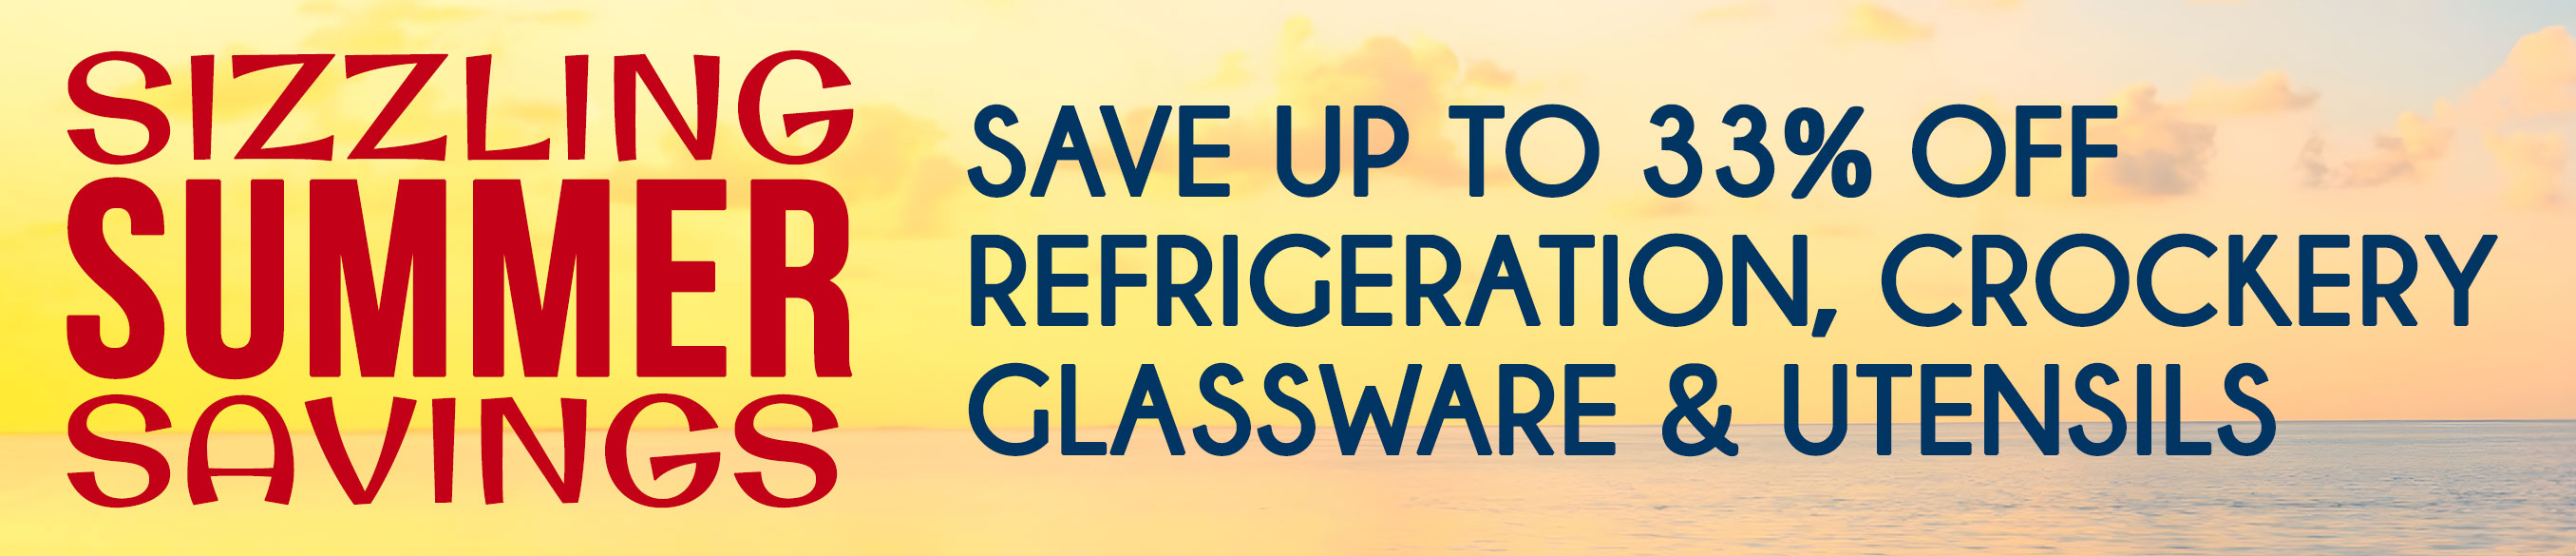 Sizzling Summer Savings - Save up to 33% on commercial refrigeration, crockery, glassware and utensils